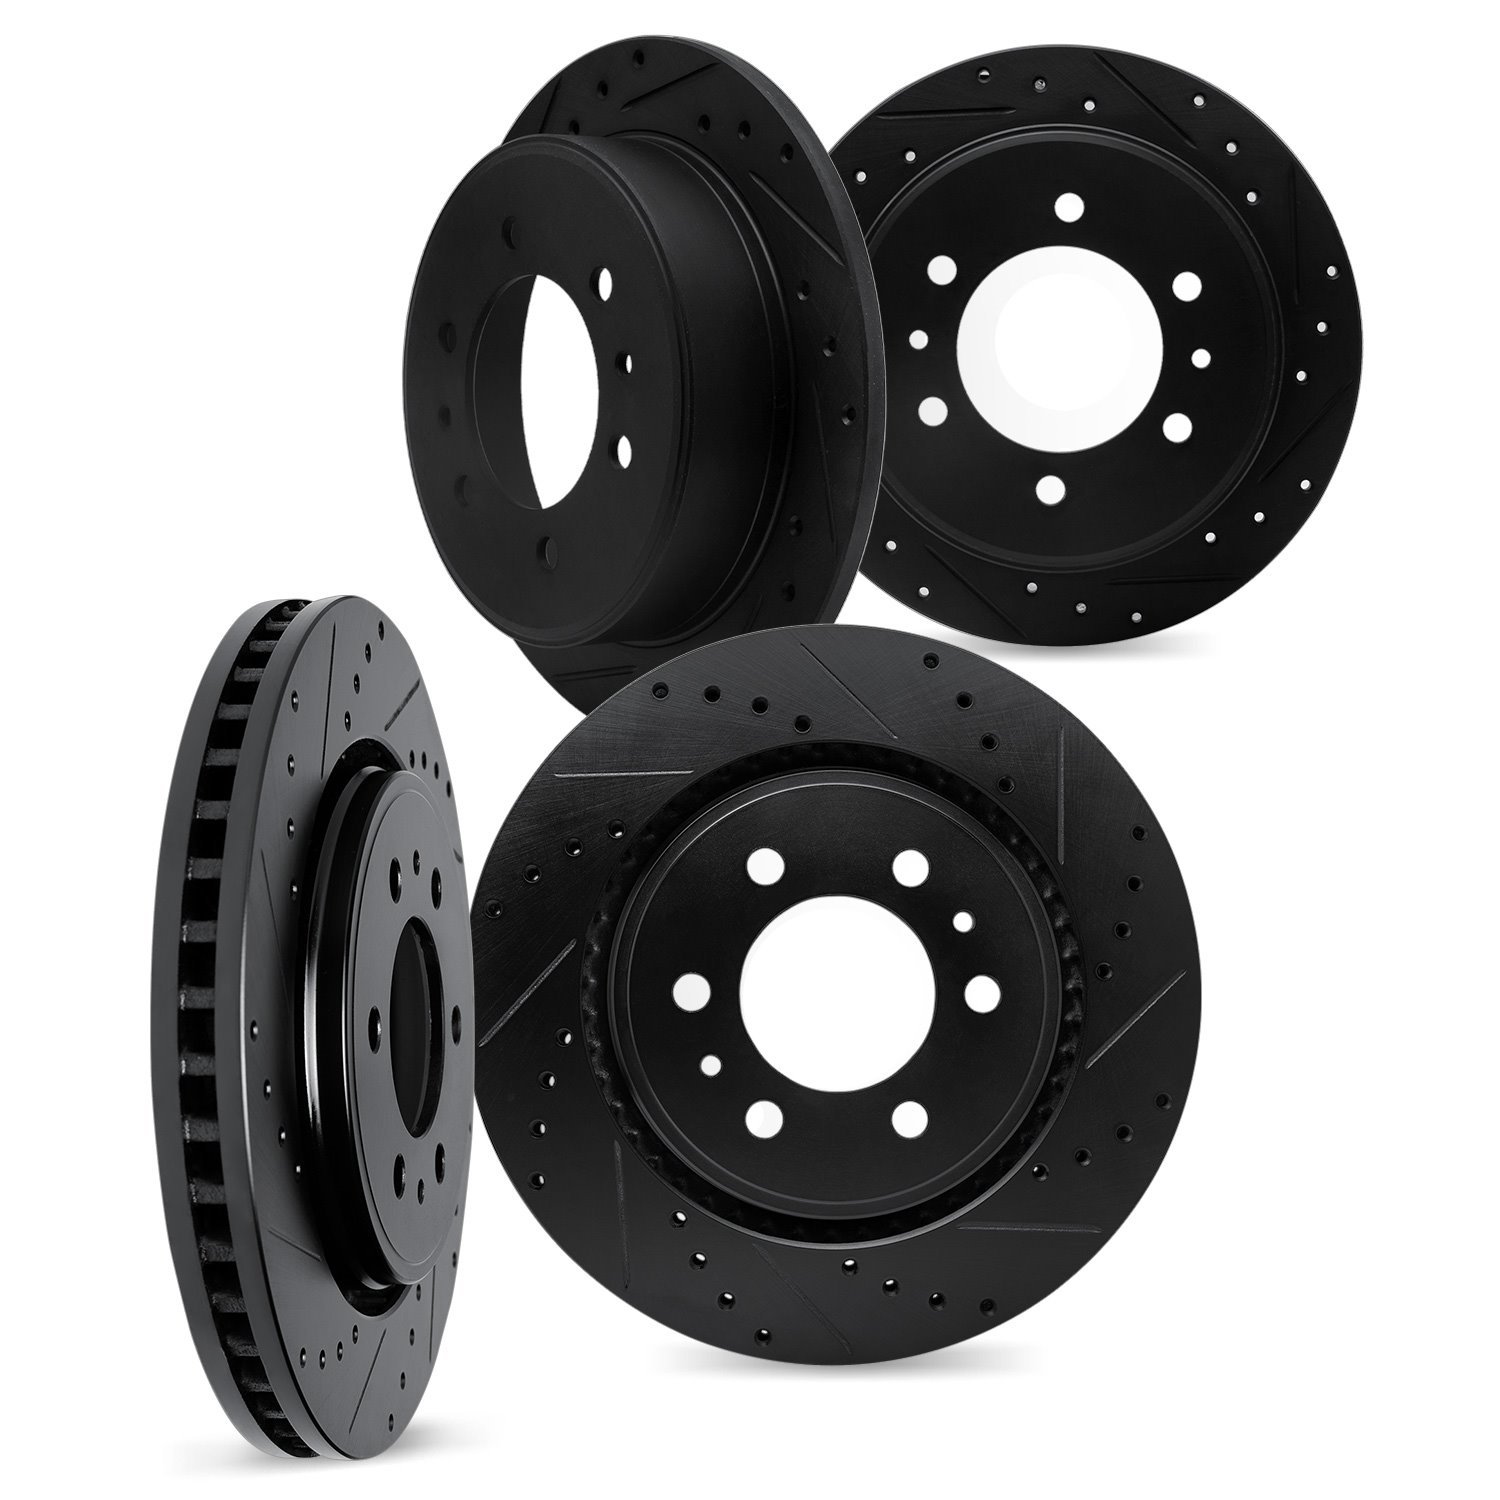 8004-72075 Drilled/Slotted Brake Rotors [Black], 1990-2004 Mitsubishi, Position: Front and Rear